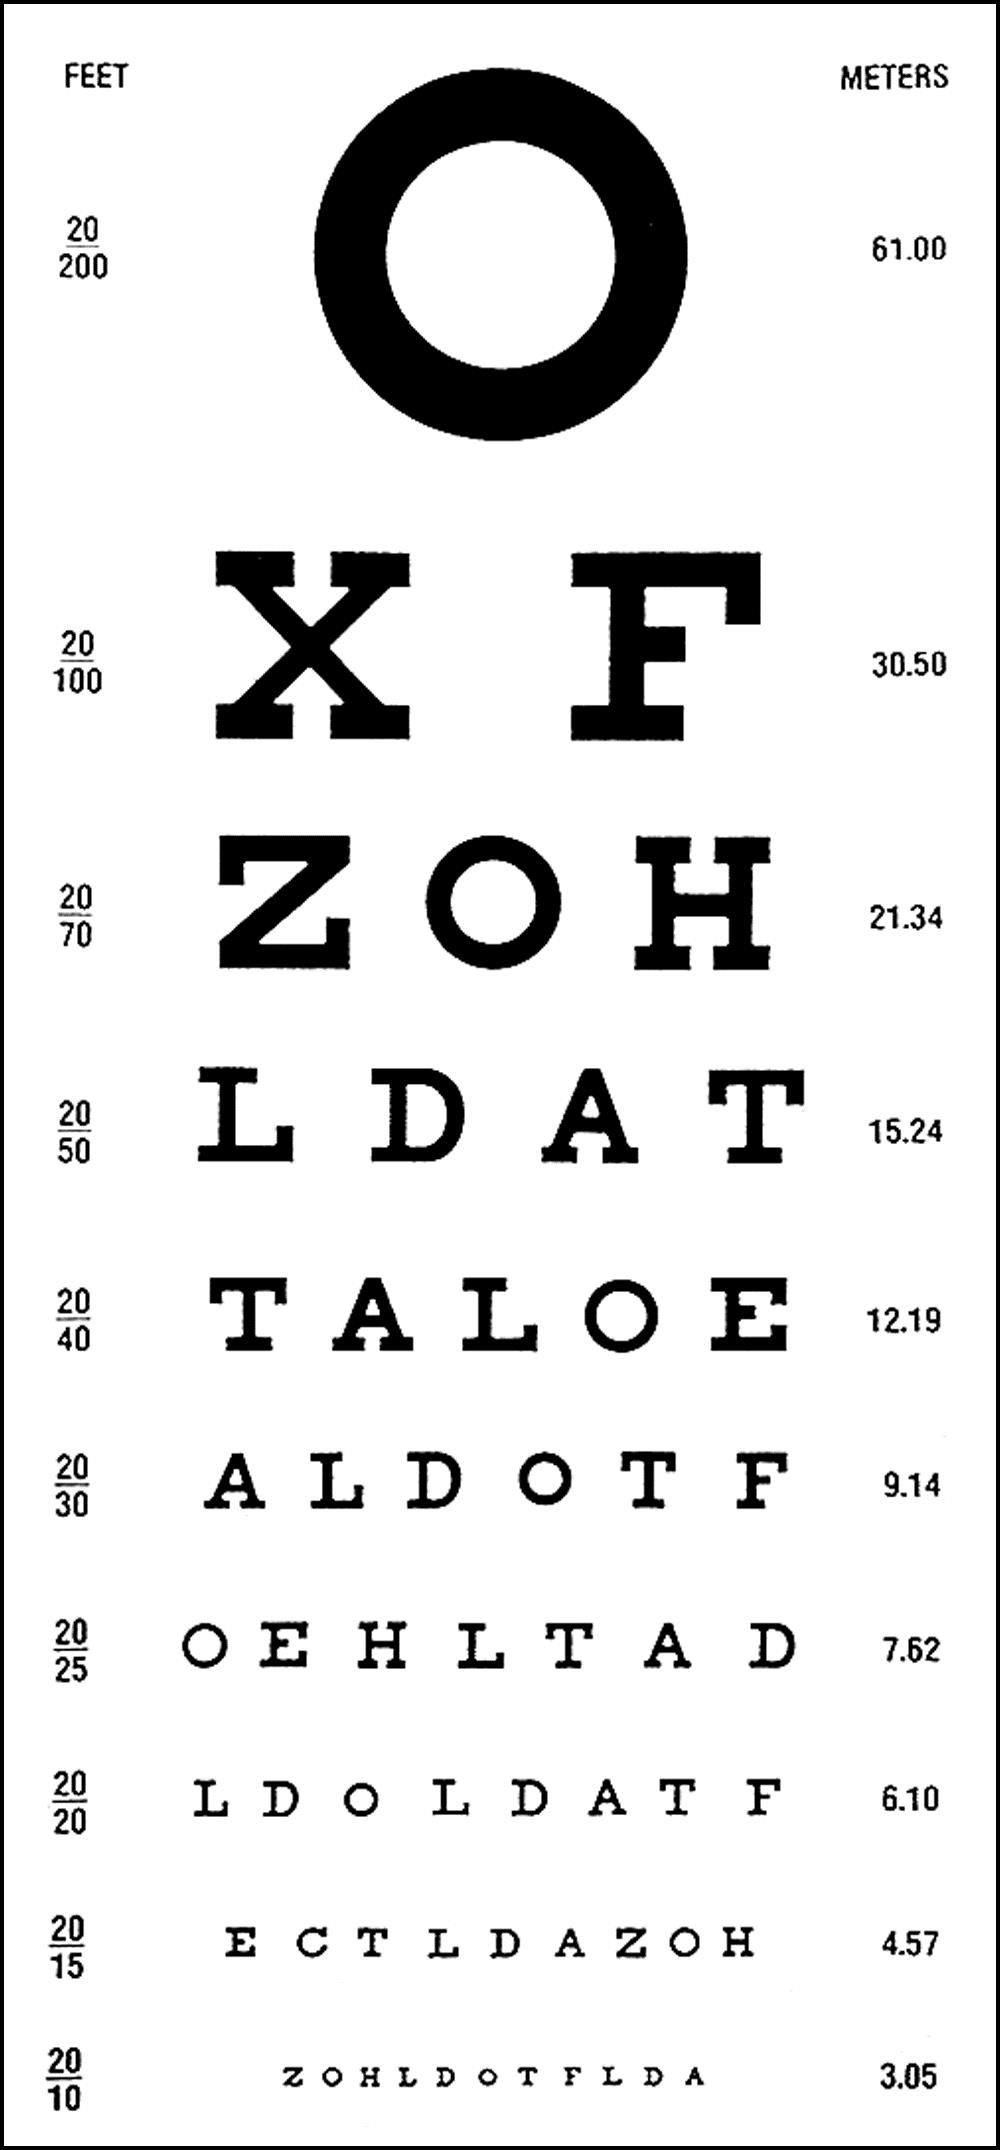 snellen-chart-american-academy-of-ophthalmology